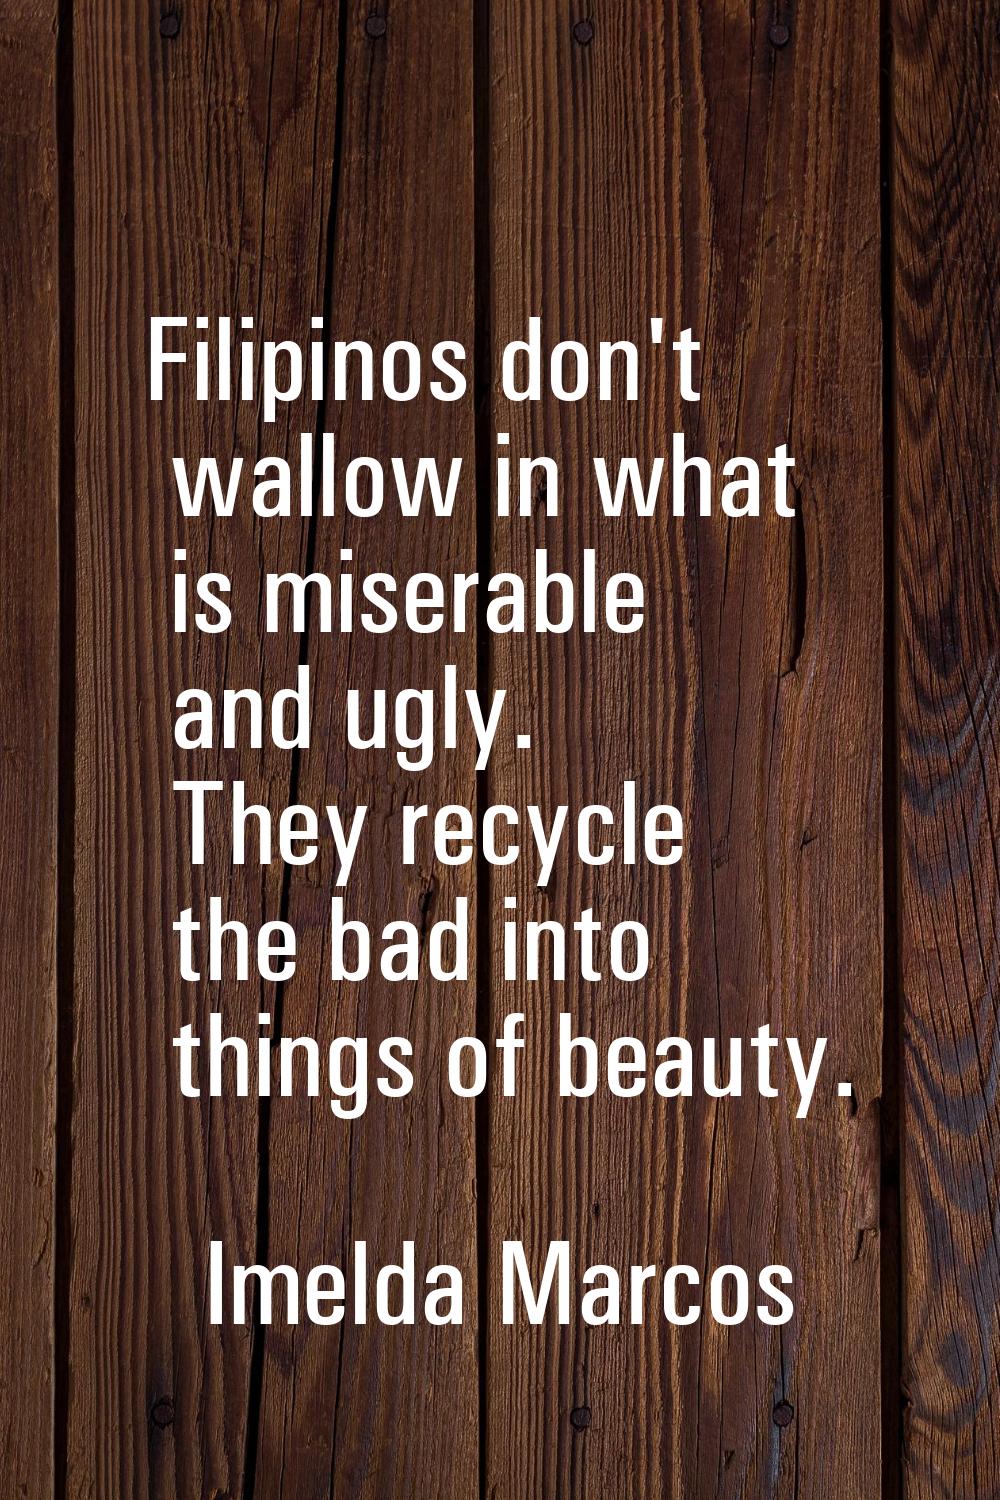 Filipinos don't wallow in what is miserable and ugly. They recycle the bad into things of beauty.